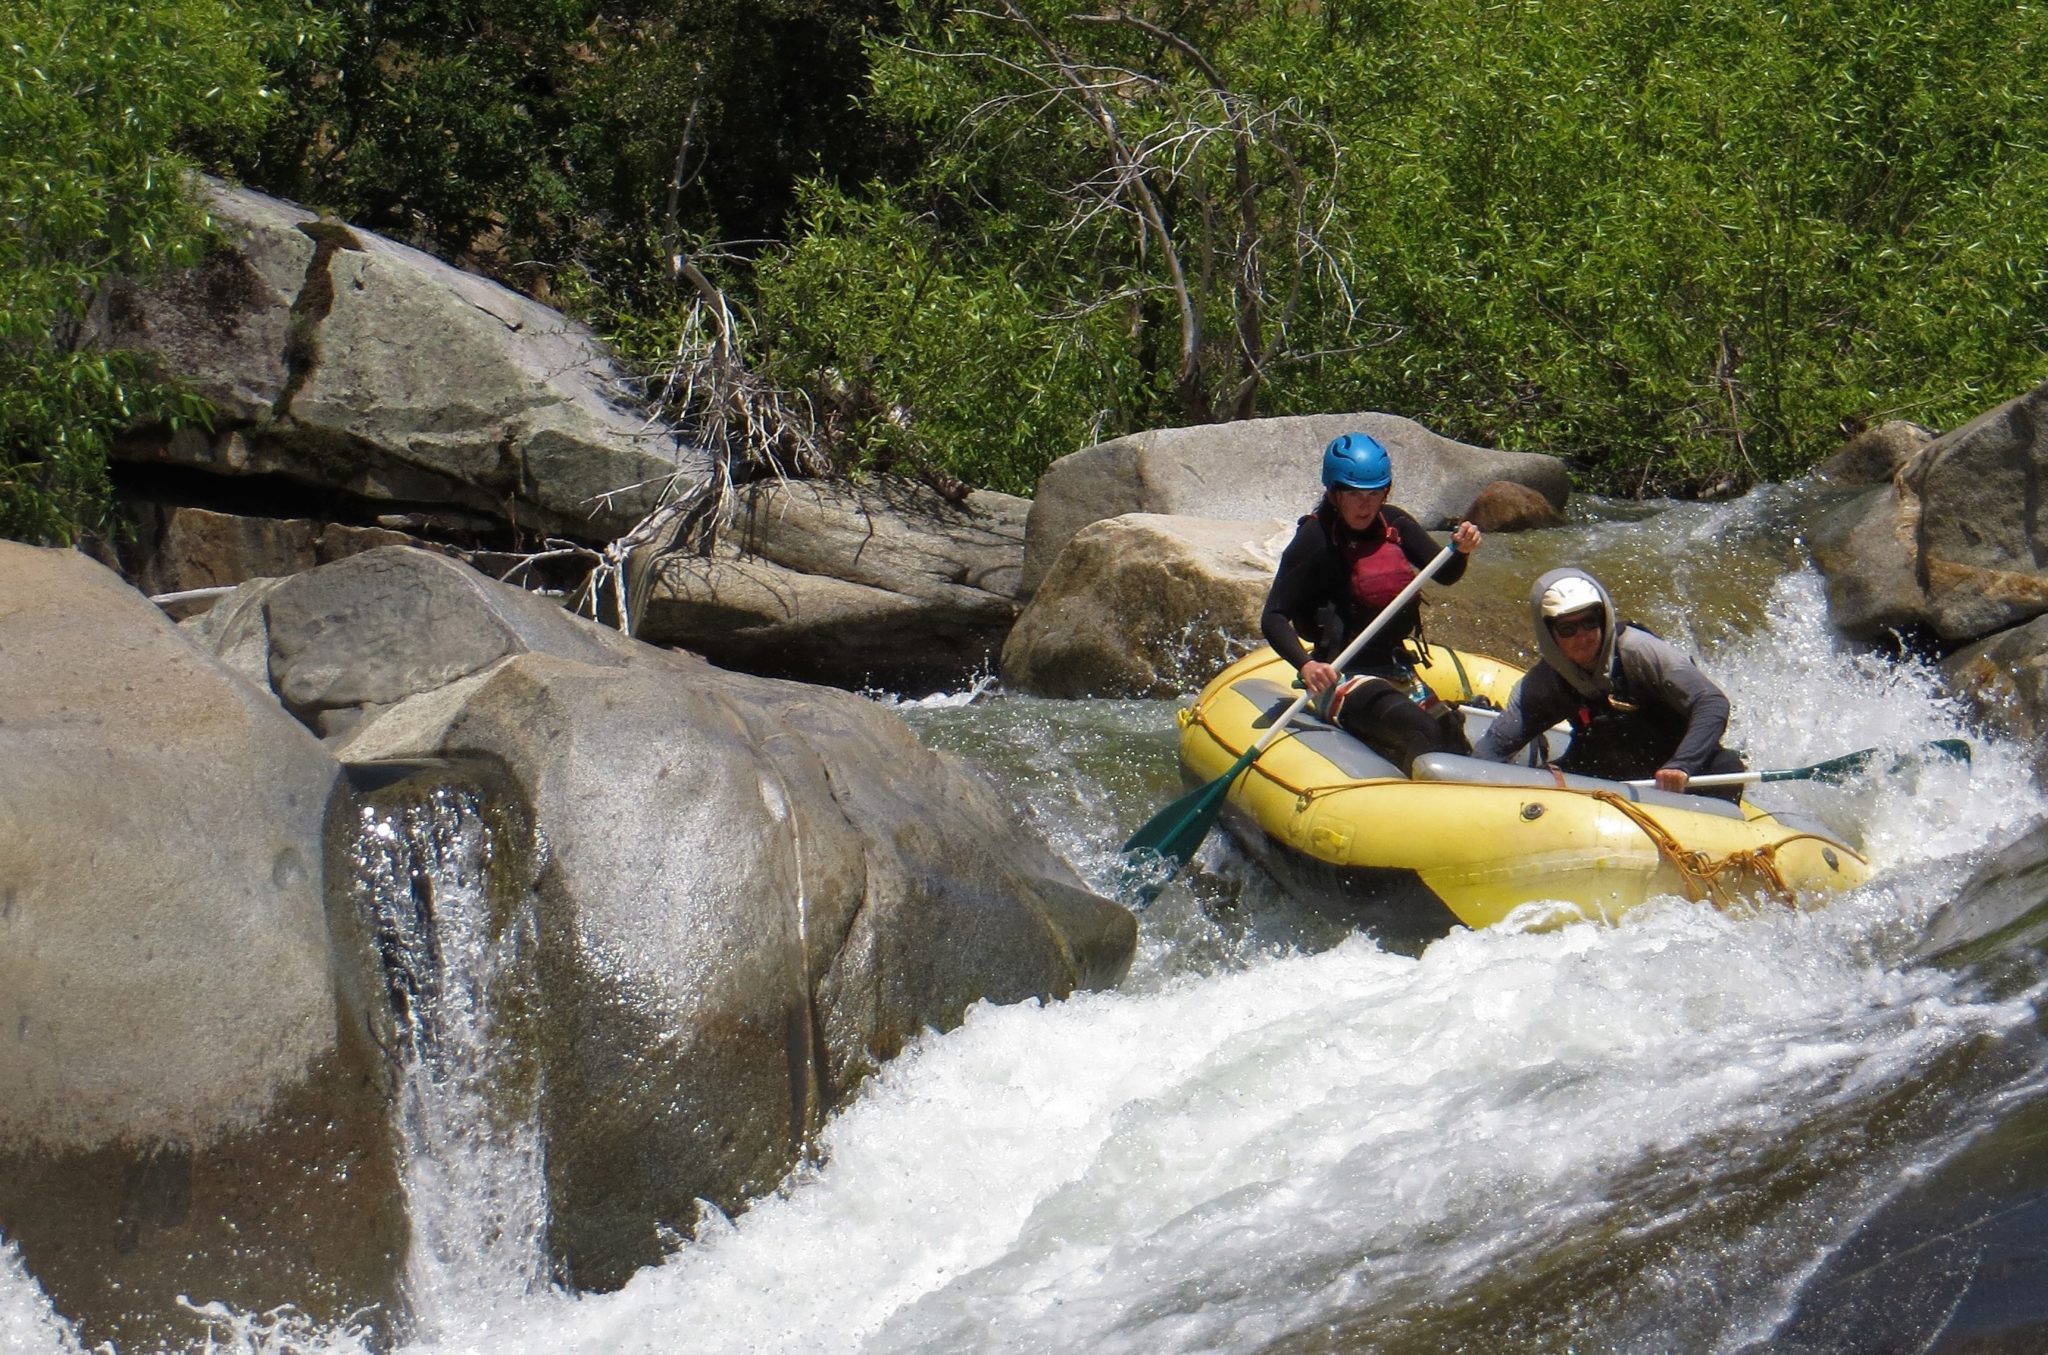 Favorite Gear and Clothing to Wear Whitewater Rafting